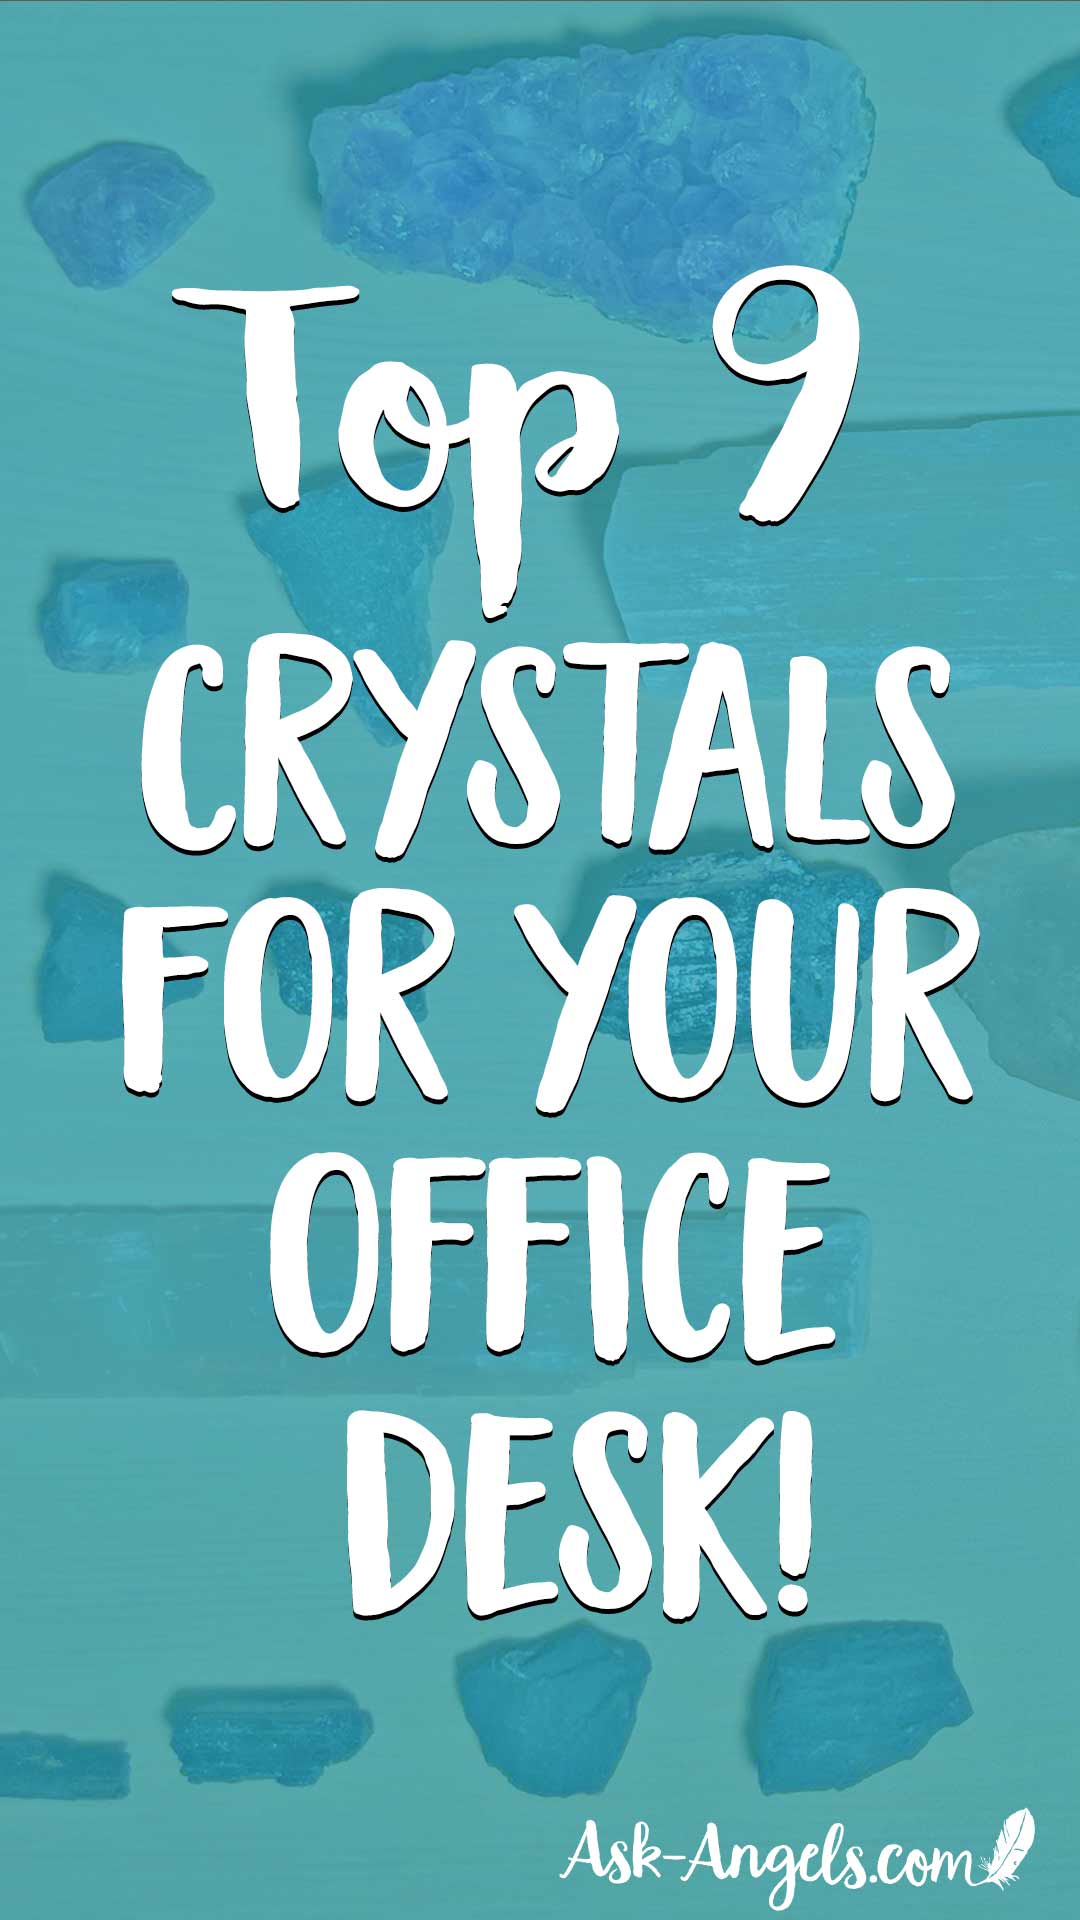 Learn the Top Crystals for your Office Desk and Workplace Here Now